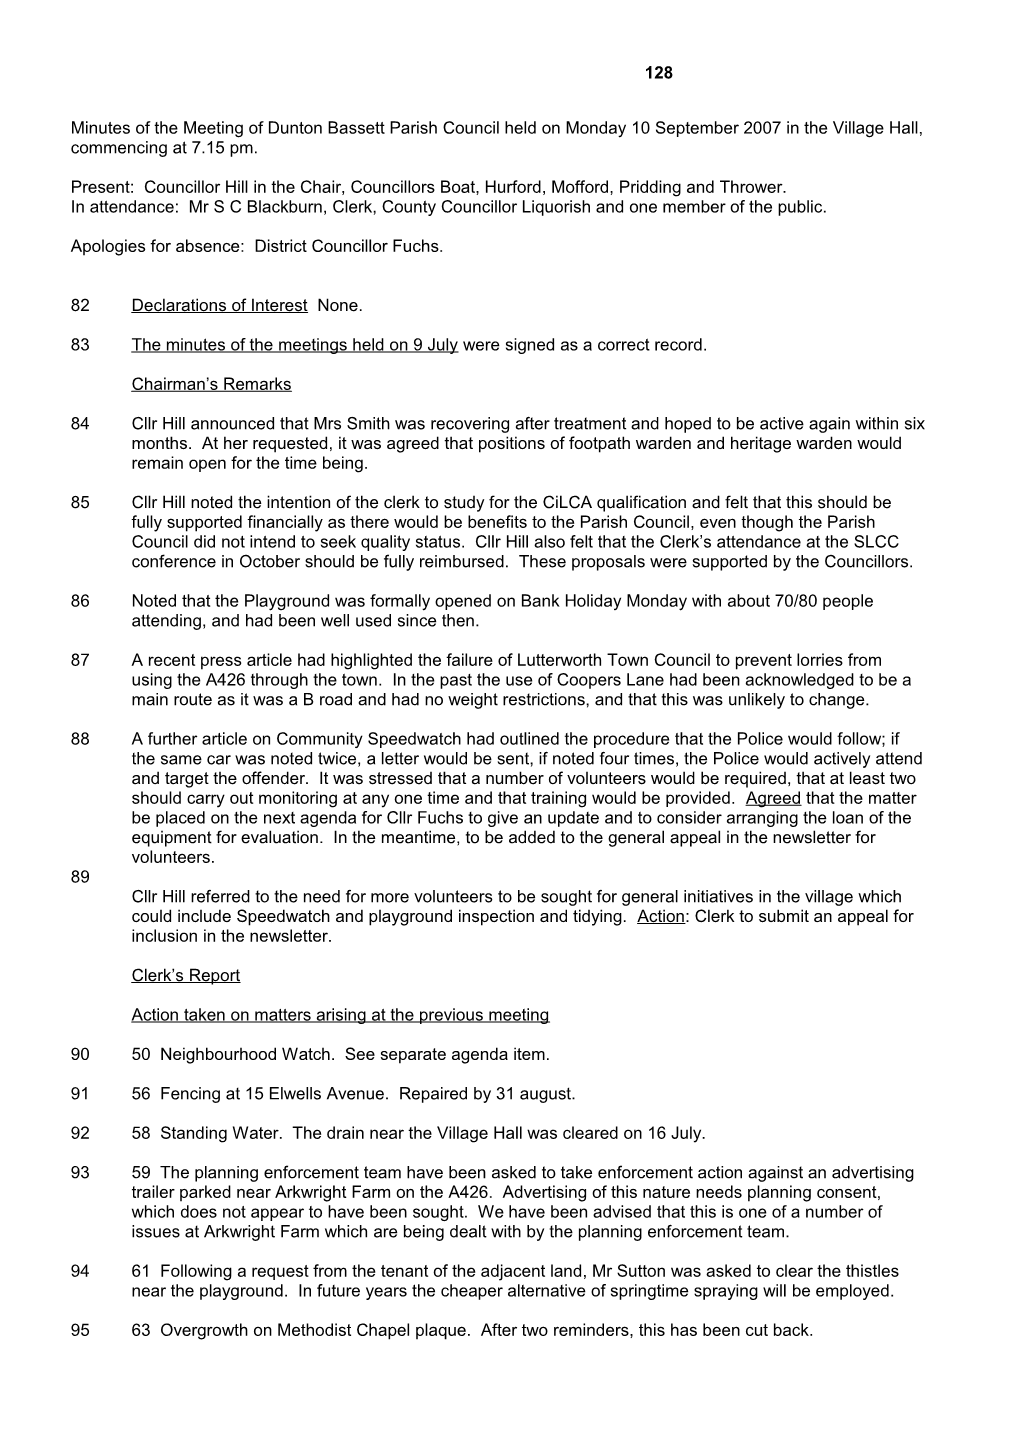 Minutes of the Meting of Dunton Bassett Parish Council Held on Monday 14 April 2003 In